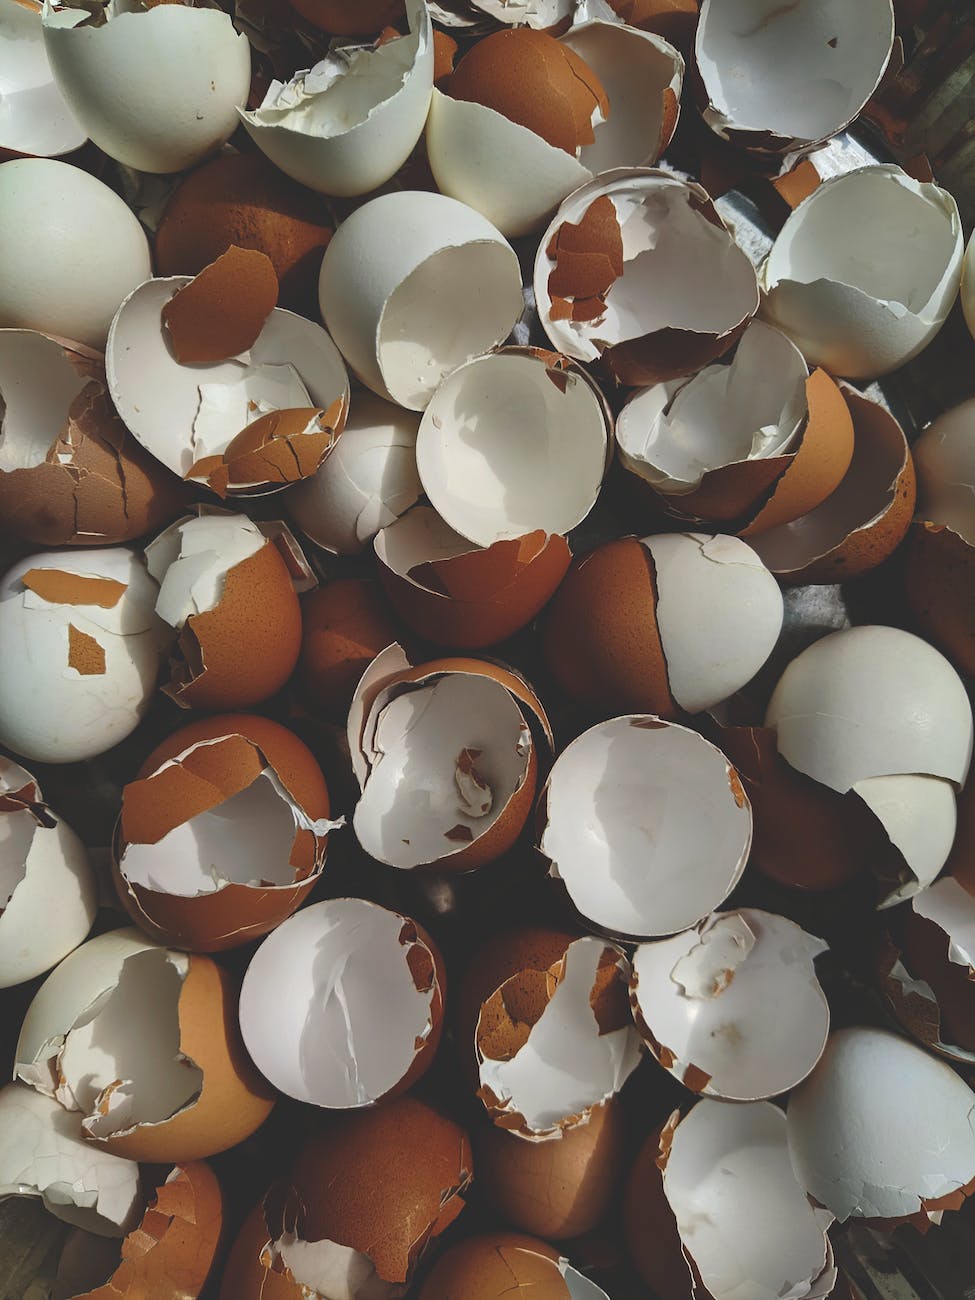 Are there any risks associated with feeding eggshells to cats?